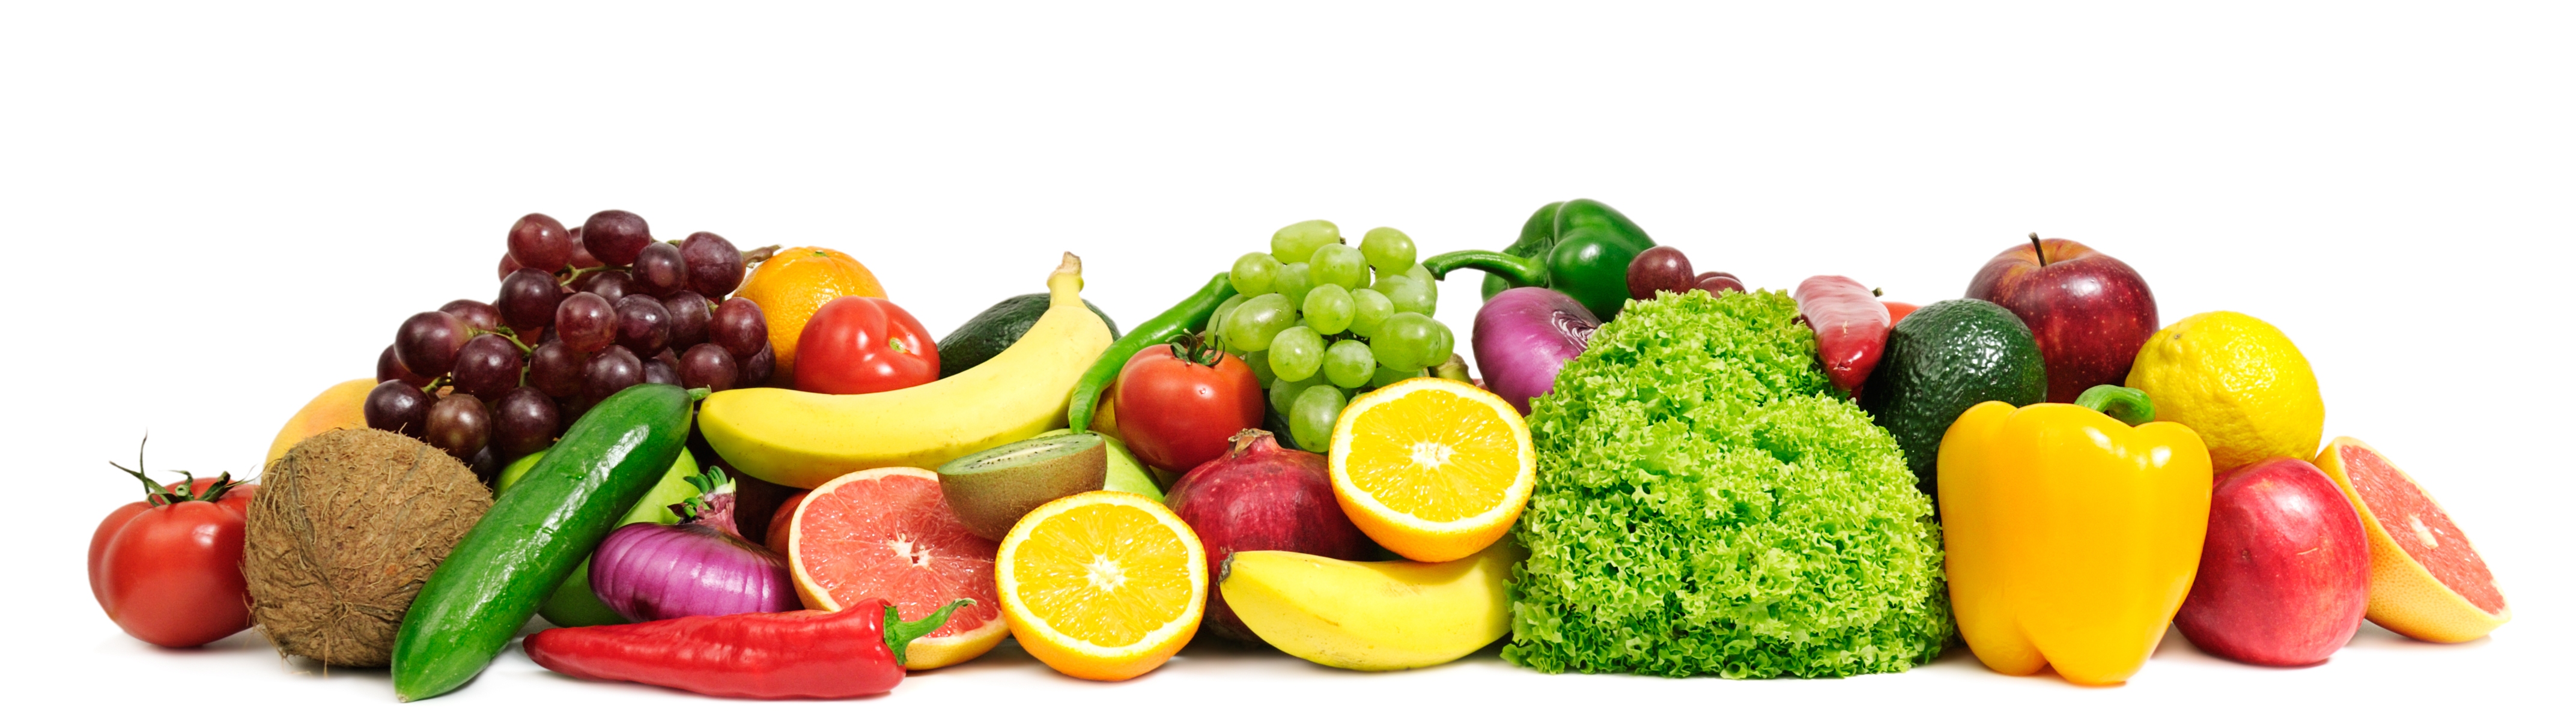 fruits-and-vegetables-narrow